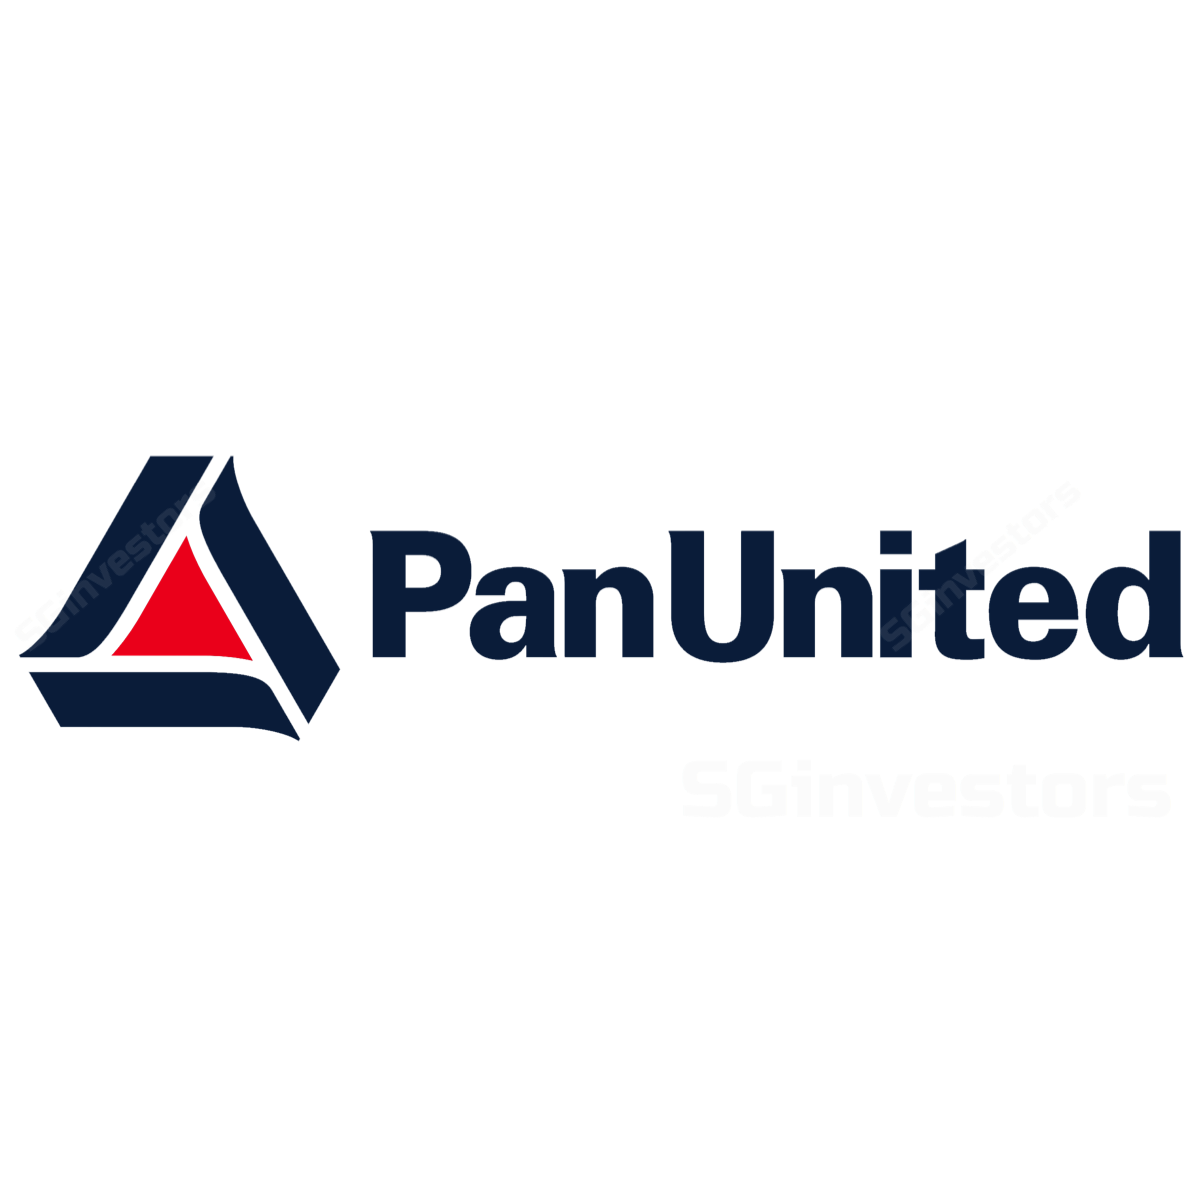 Pan-United Corporation (PAN SP) - DBS Vickers 2017-11-13: RMC Business Still Muted